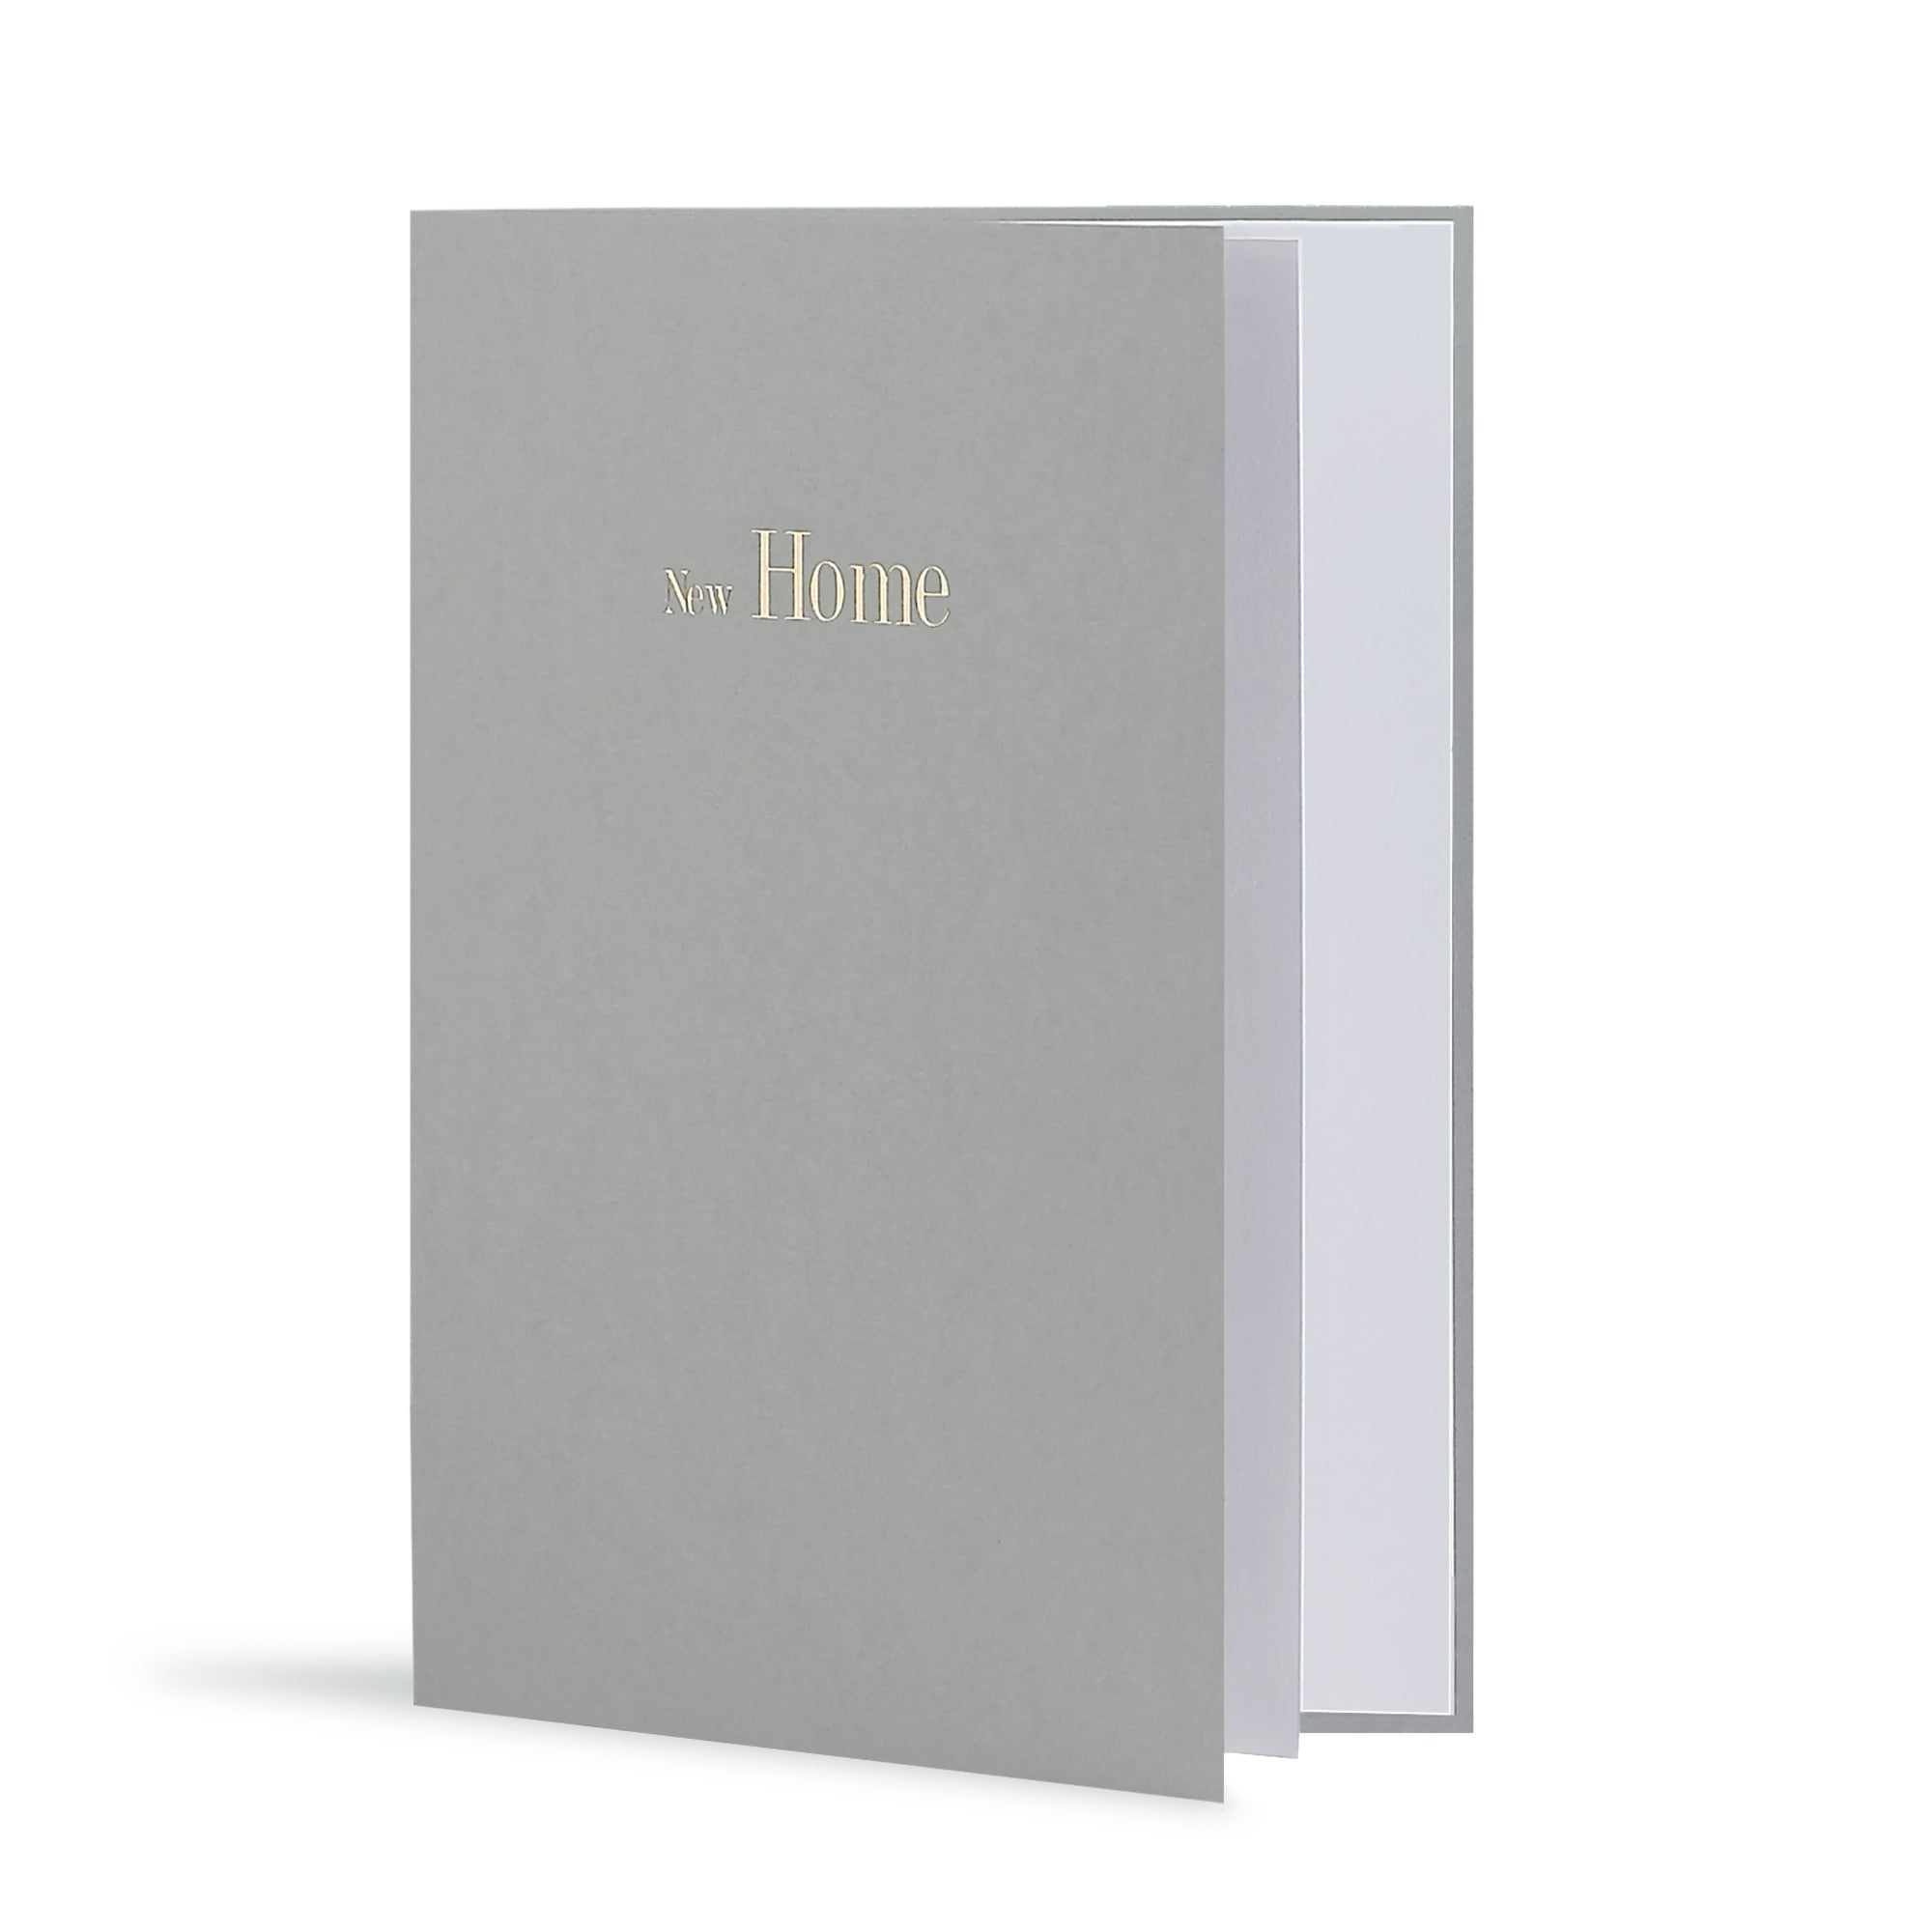 New Home Greeting Card in Grey, Side